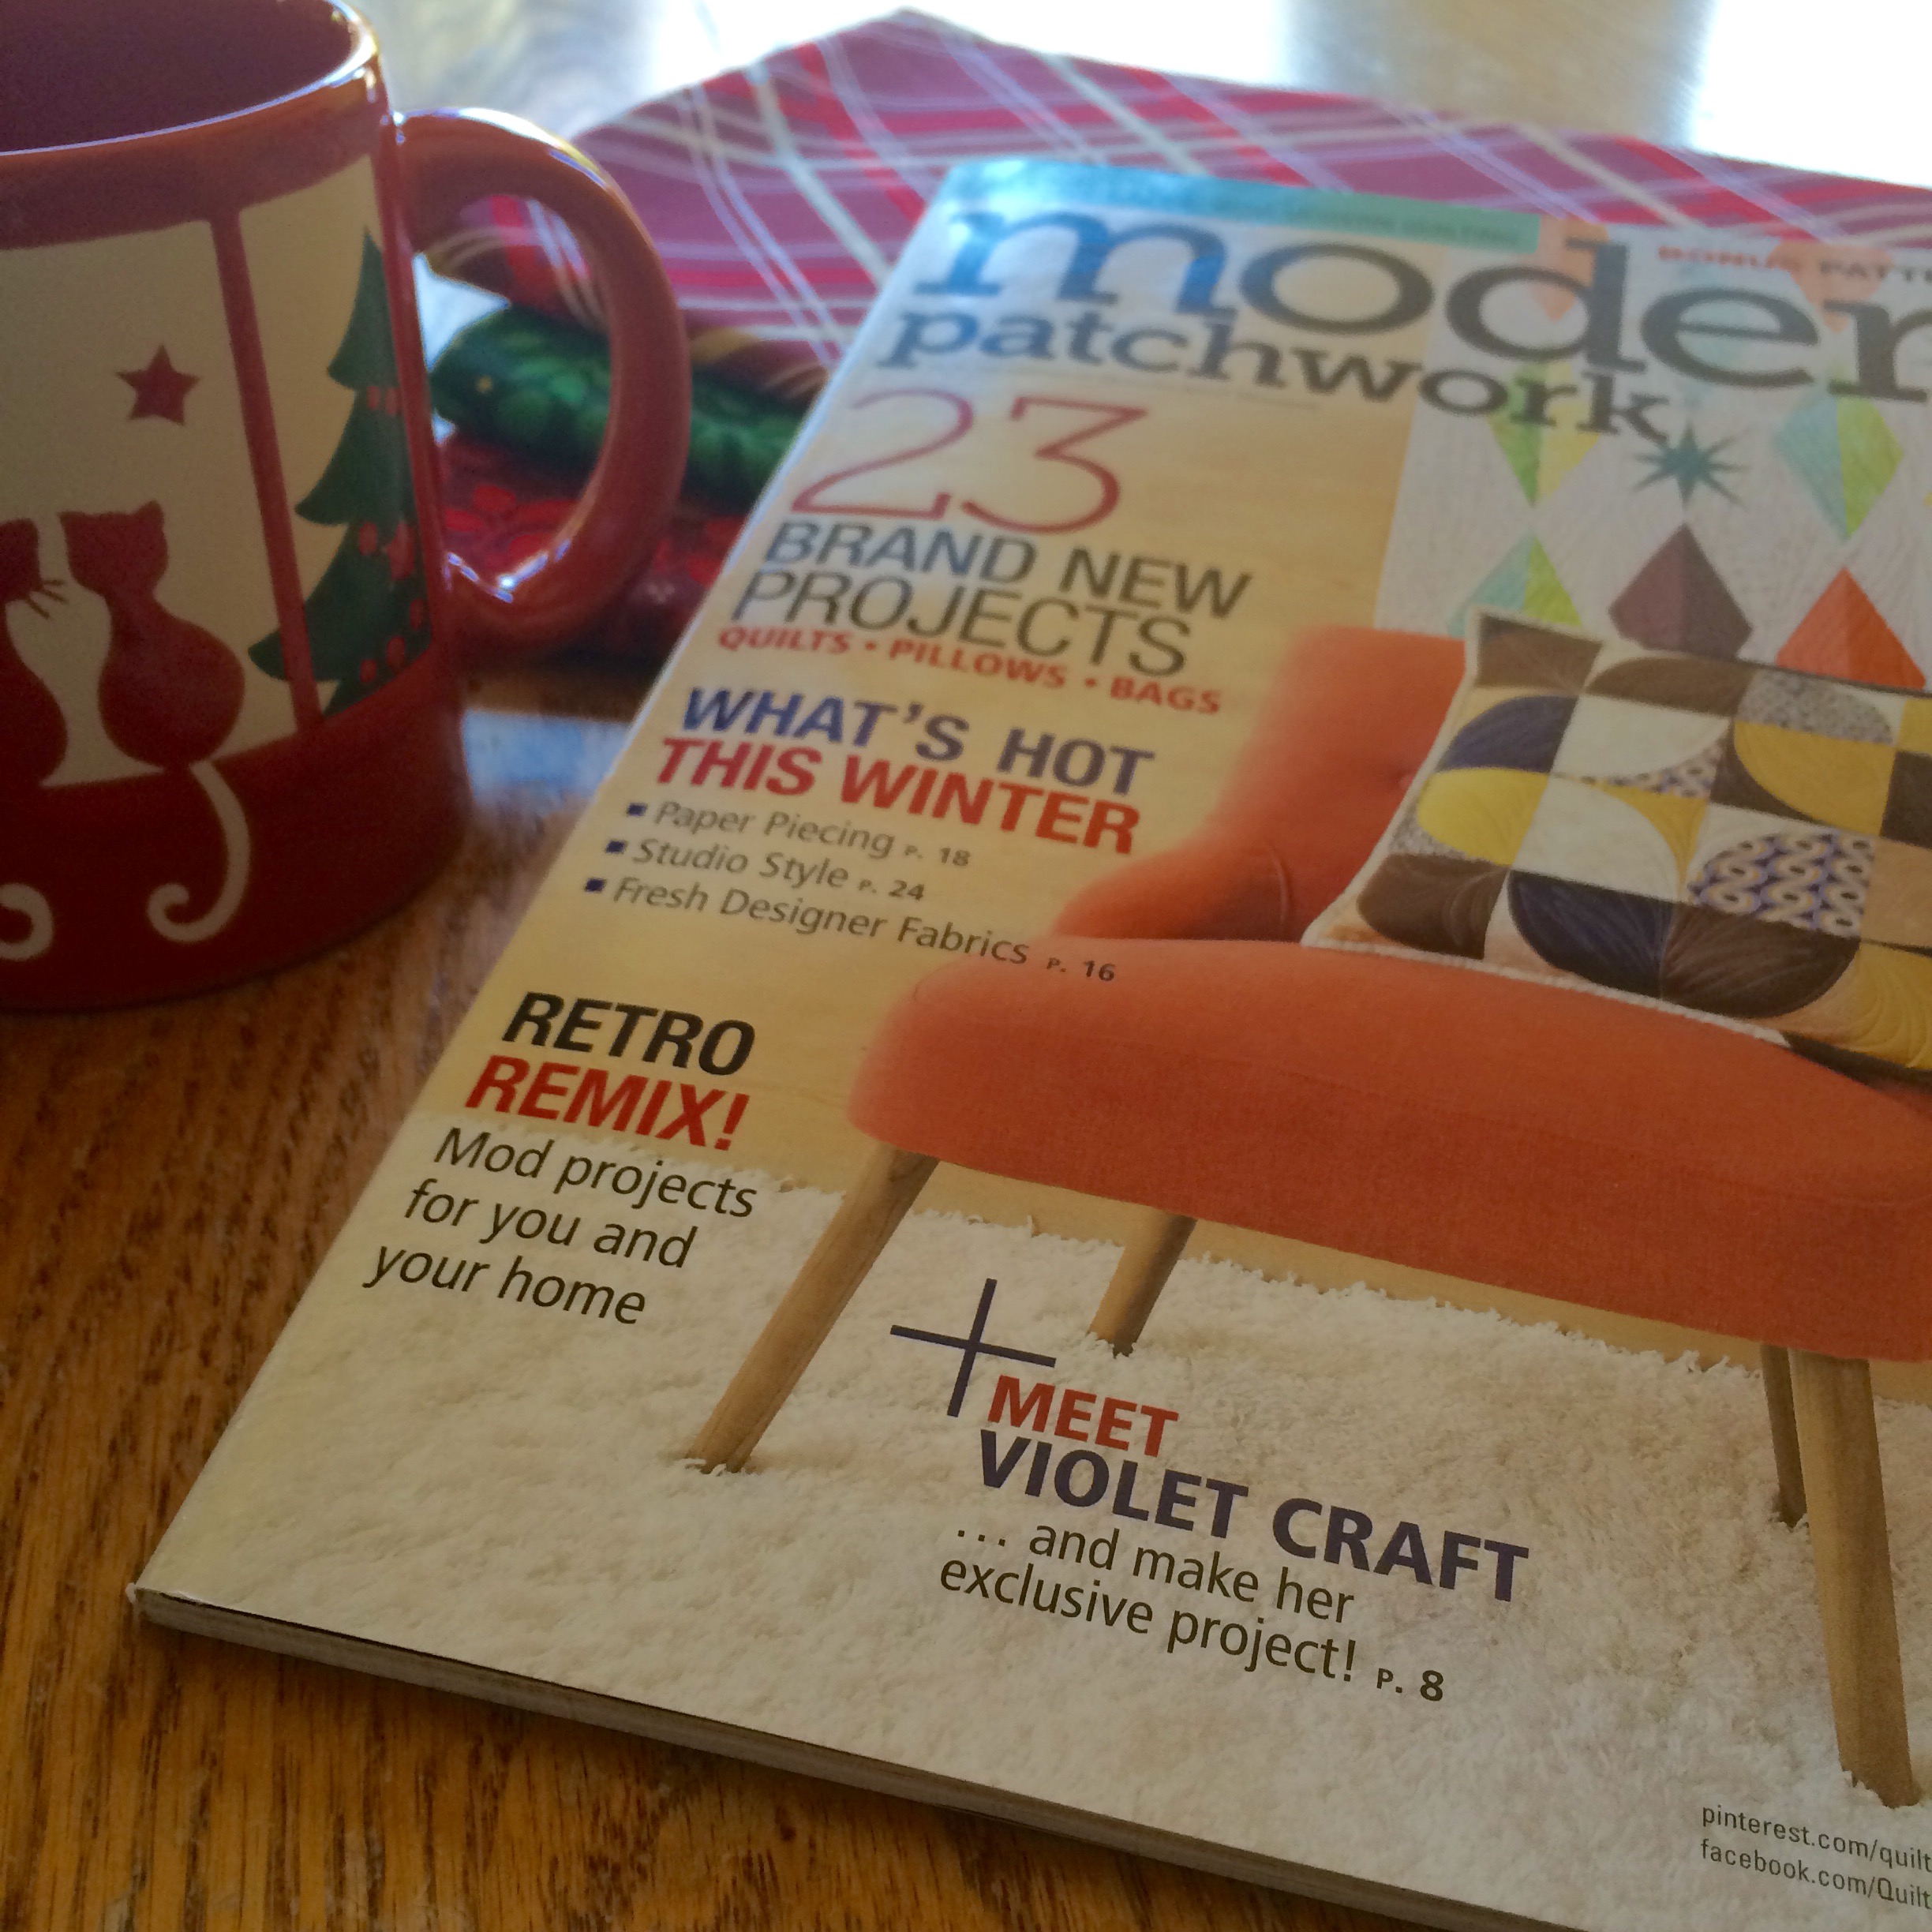 Modern Patchwork And The Cardinal Violet Craft